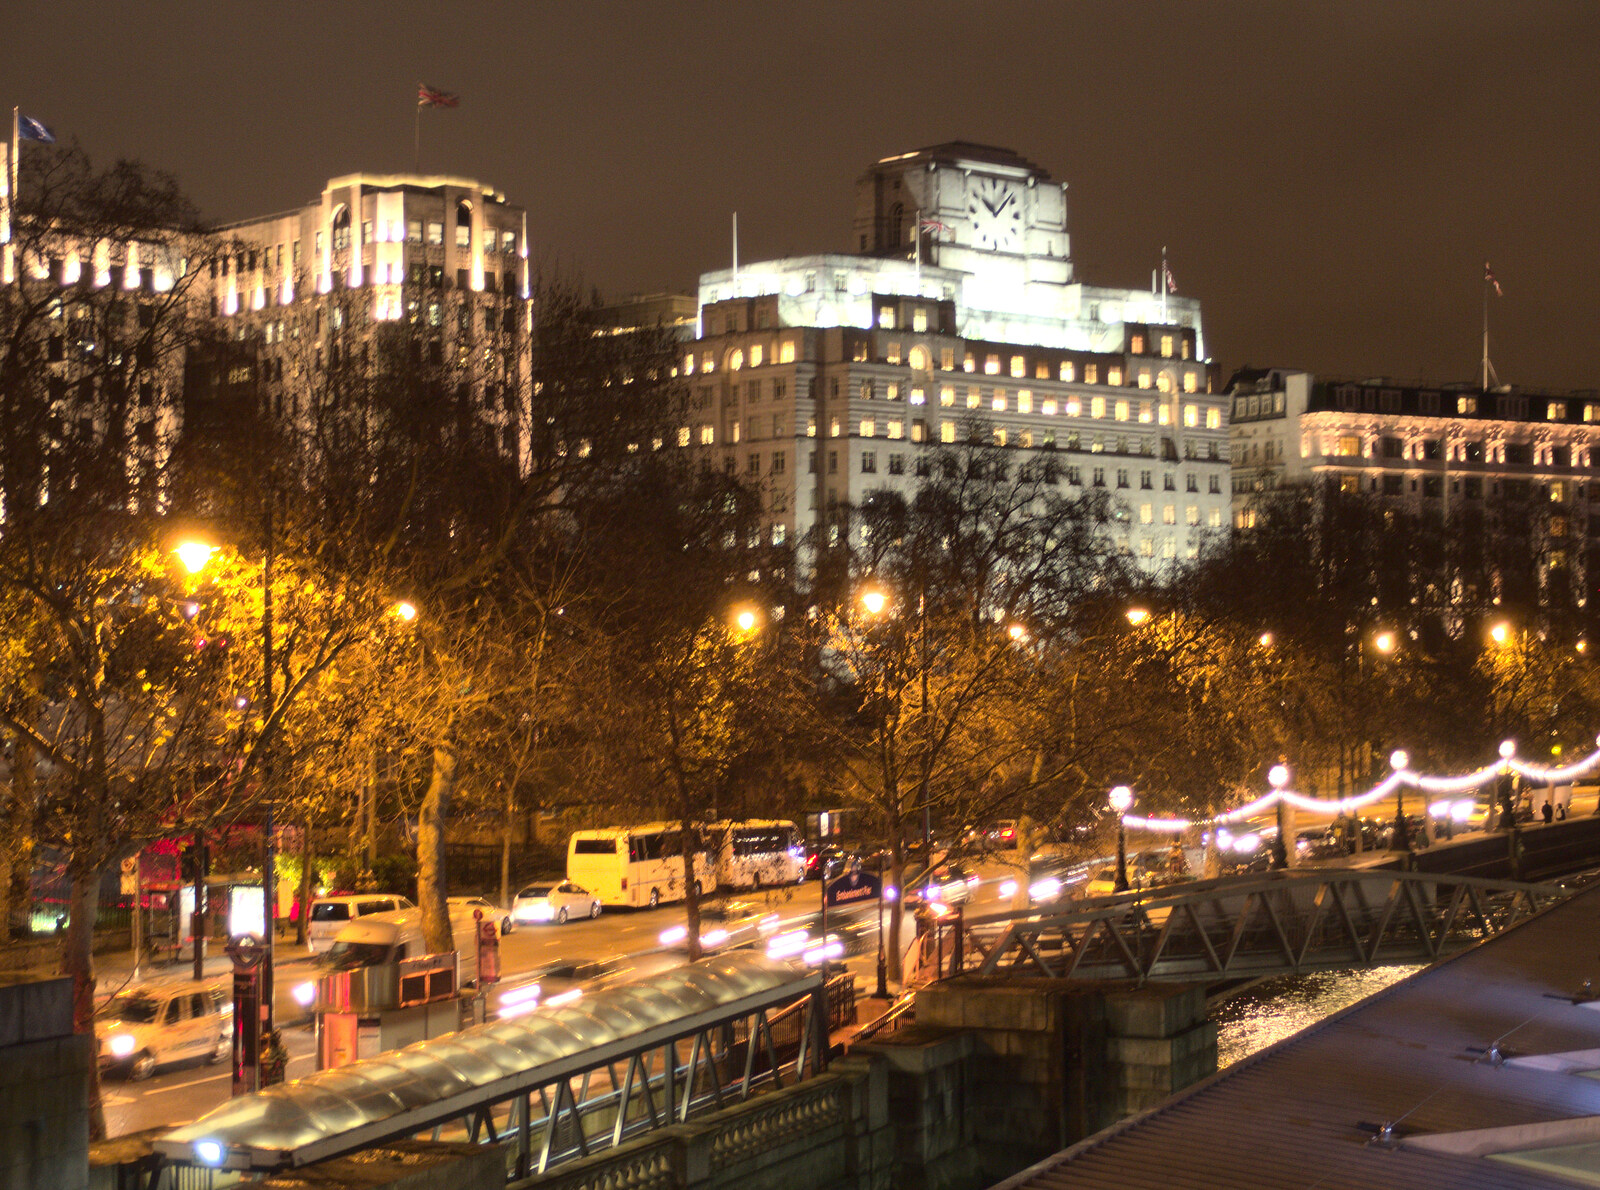 Embankment on the Thames from SwiftKey Innovation Nights, Westminster, London - 19th December 2014